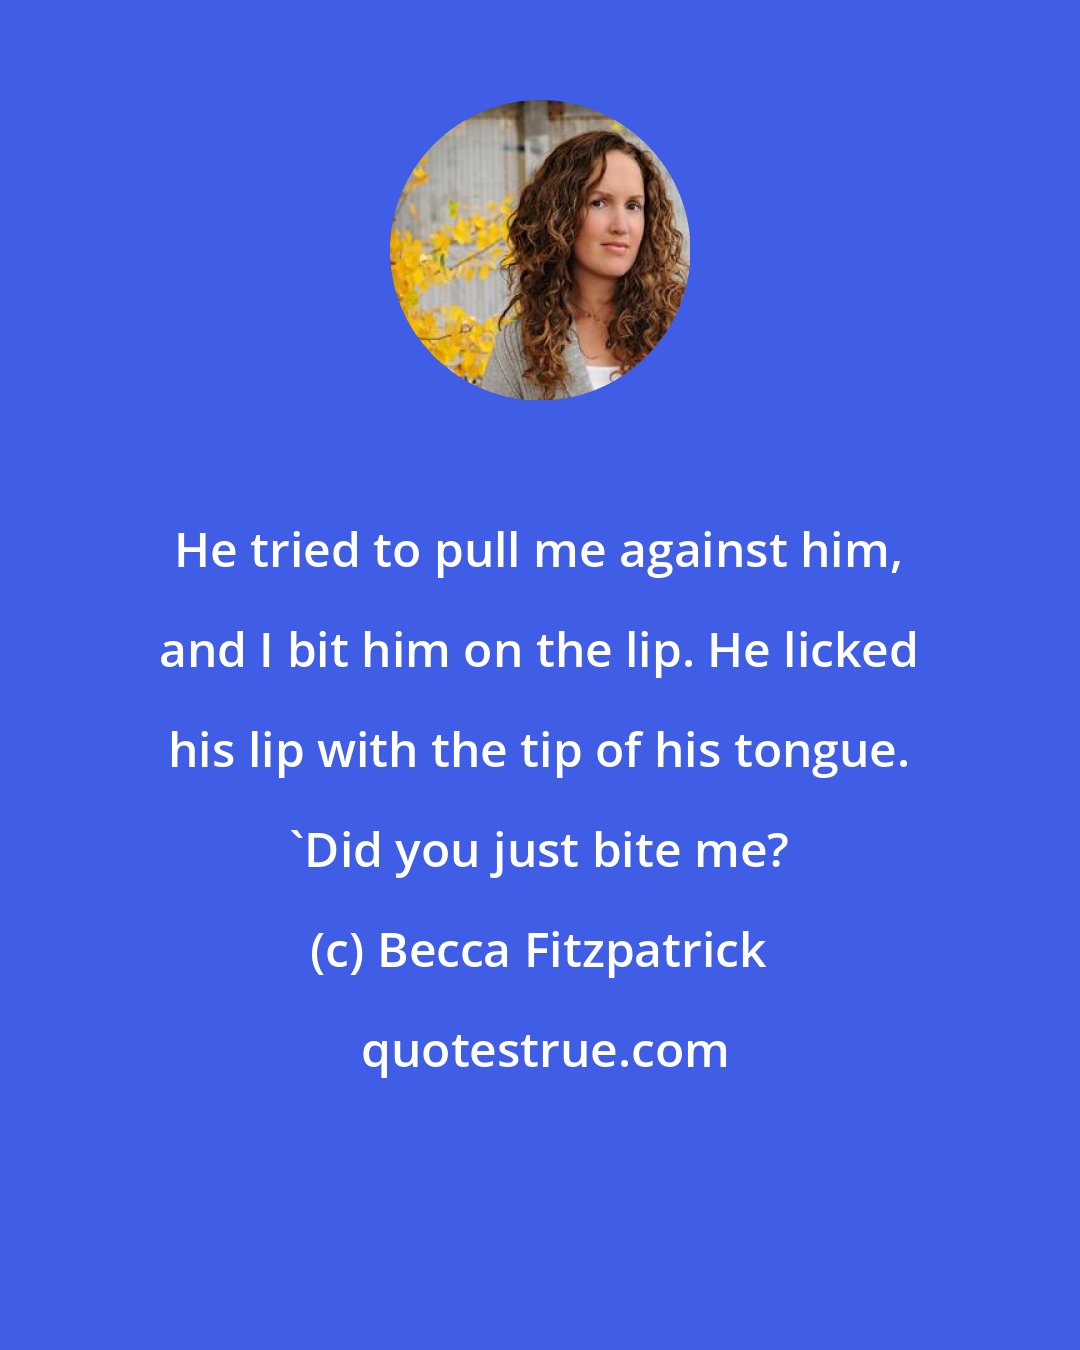 Becca Fitzpatrick: He tried to pull me against him, and I bit him on the lip. He licked his lip with the tip of his tongue. 'Did you just bite me?